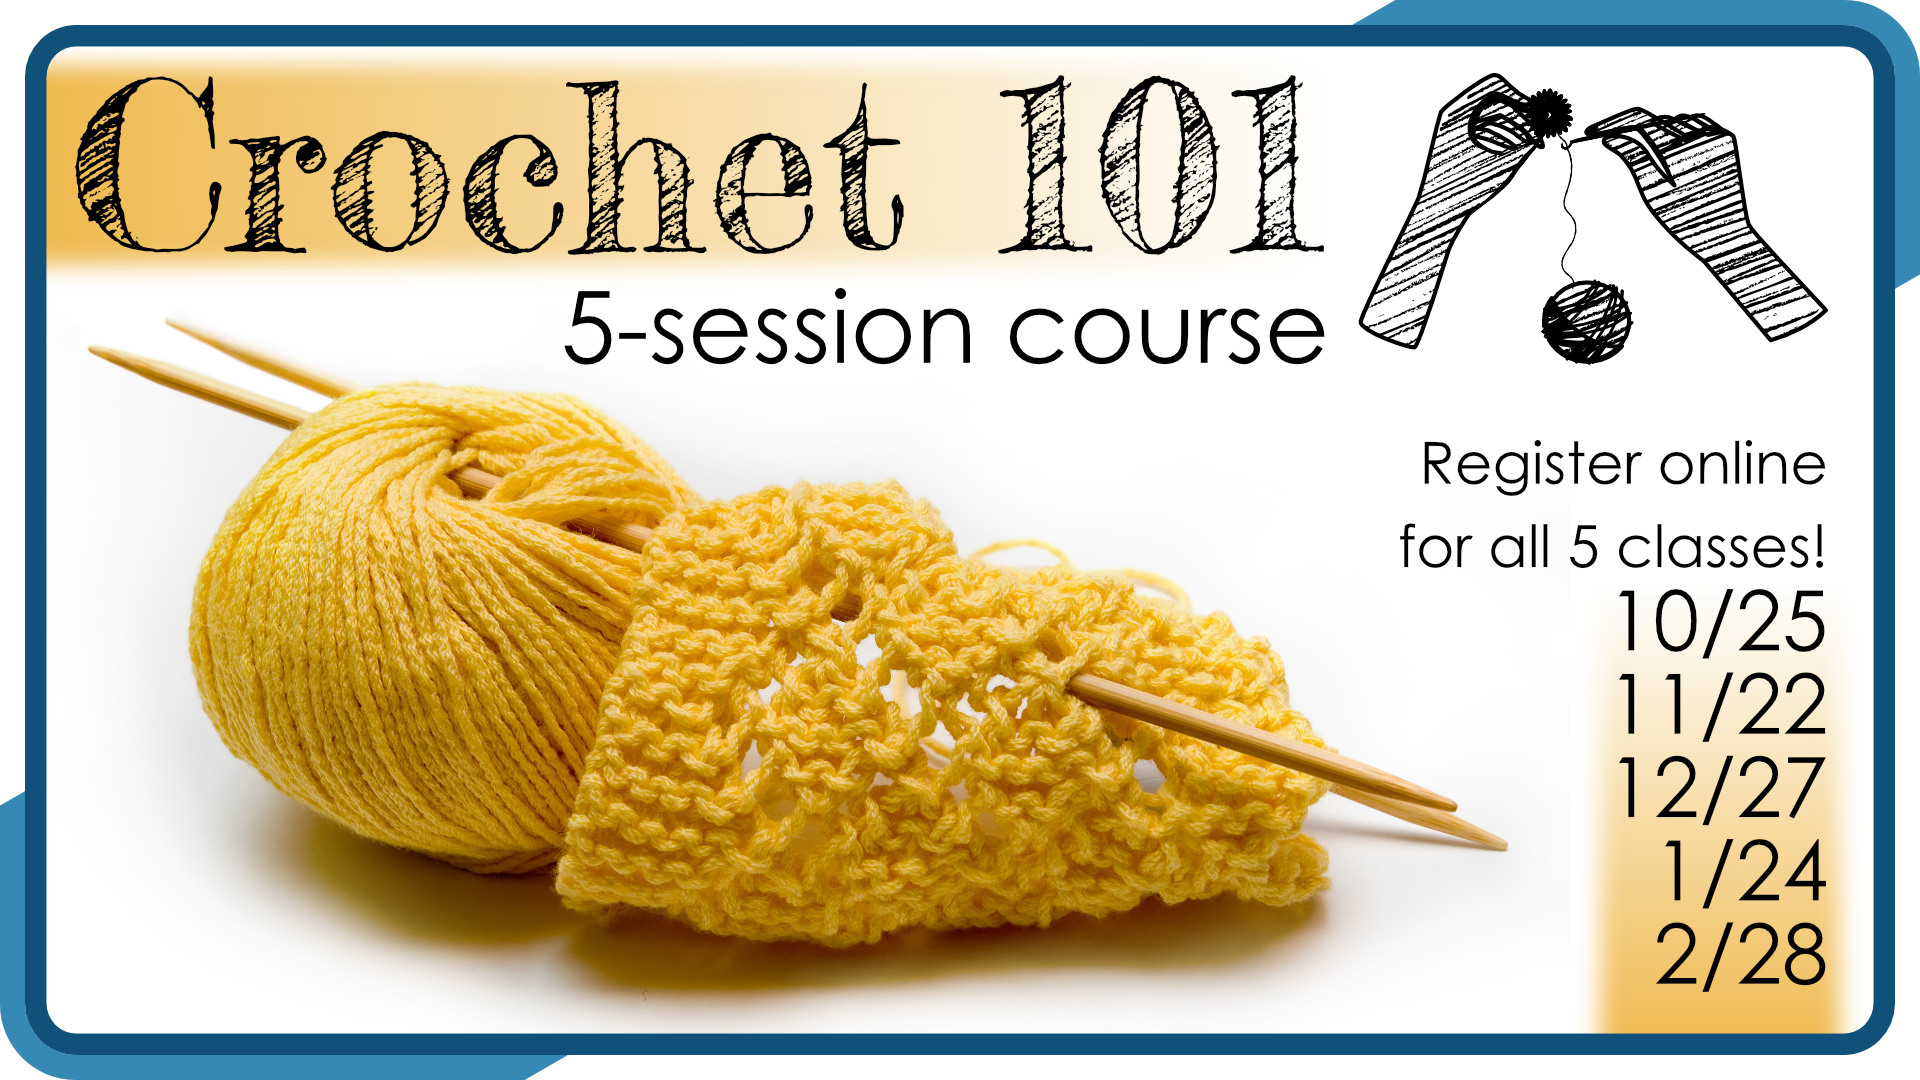 Crochet 101, 5-session course beginning October 25th at 1pm, intended for ages 13+